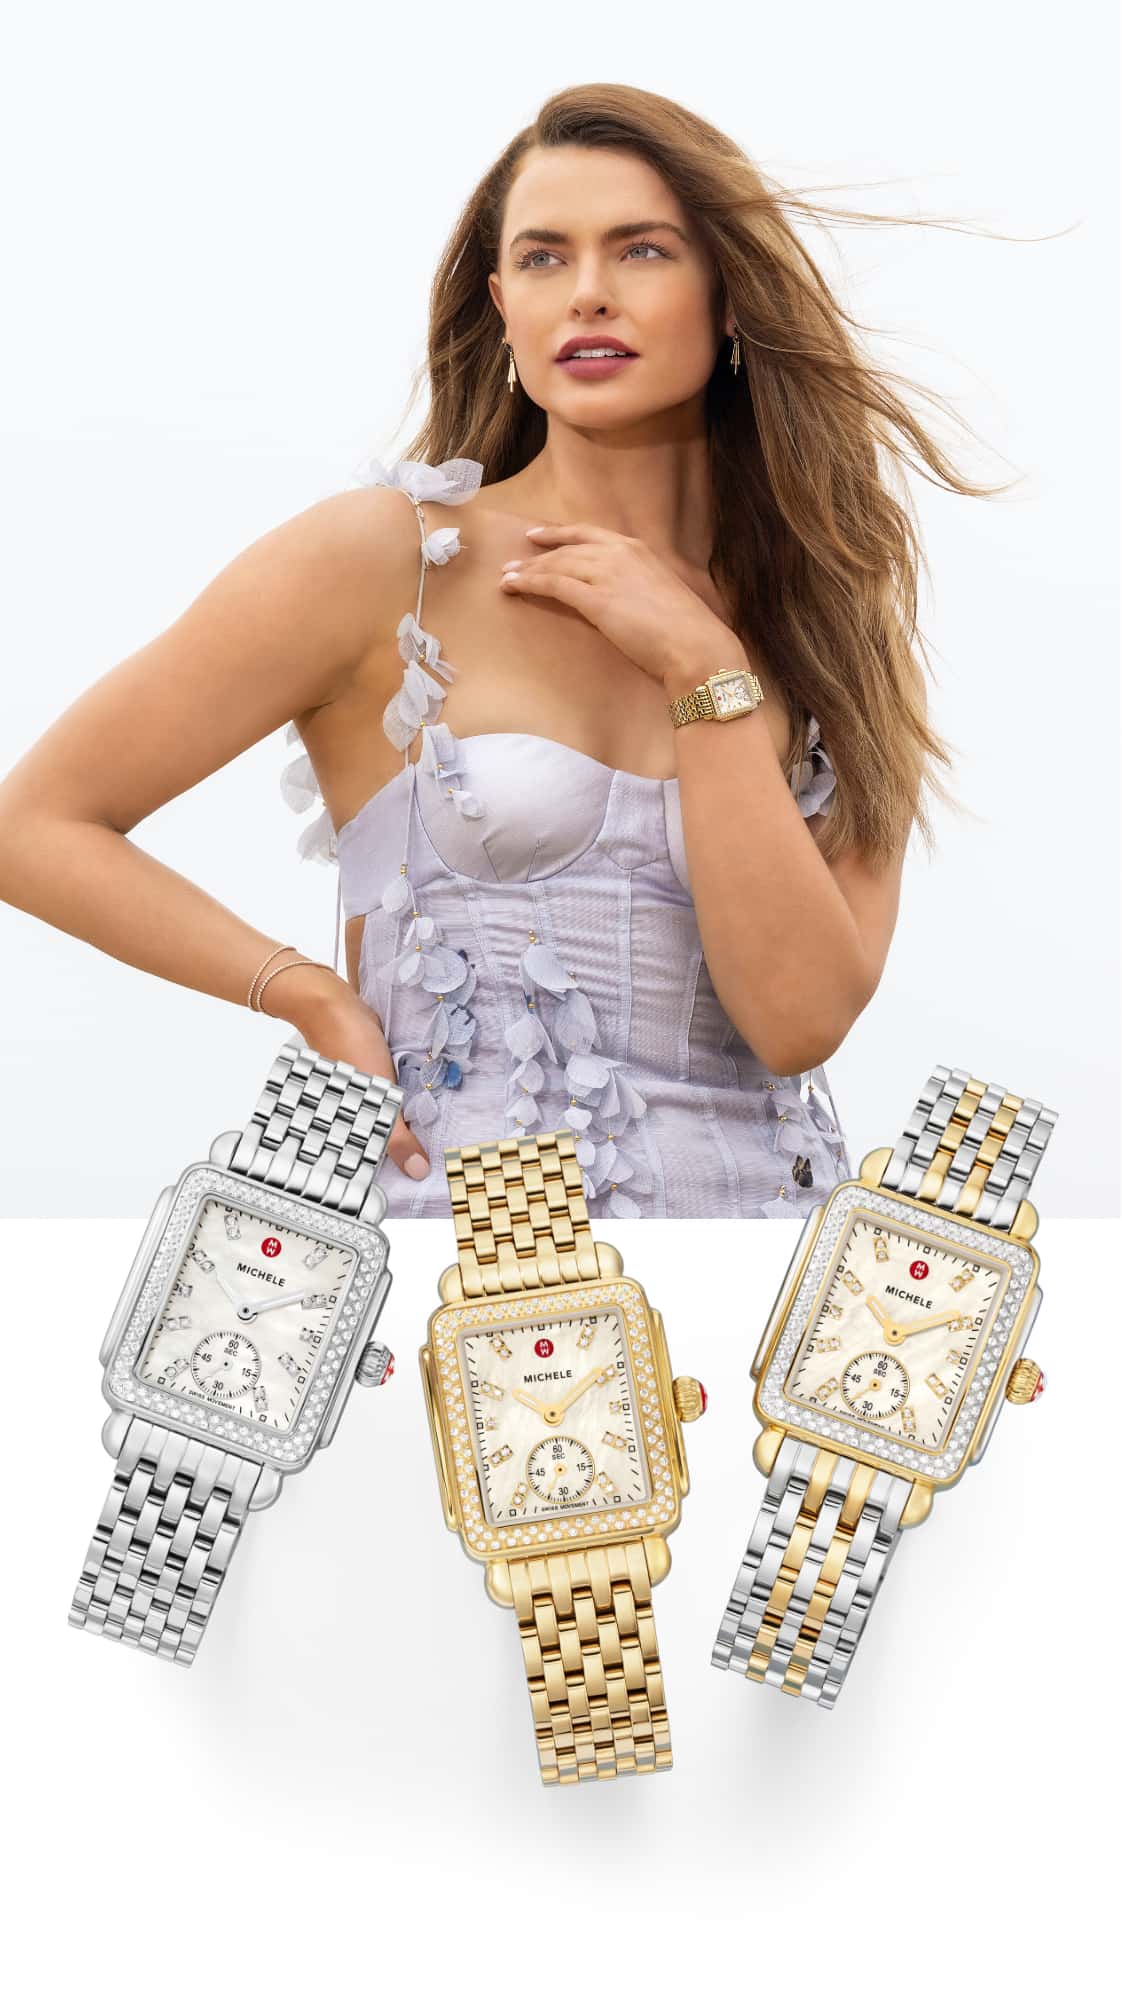 two images of a woman in a lilac dress flanking images of three Deco Mid watches in stainless, gold and two-tone platings